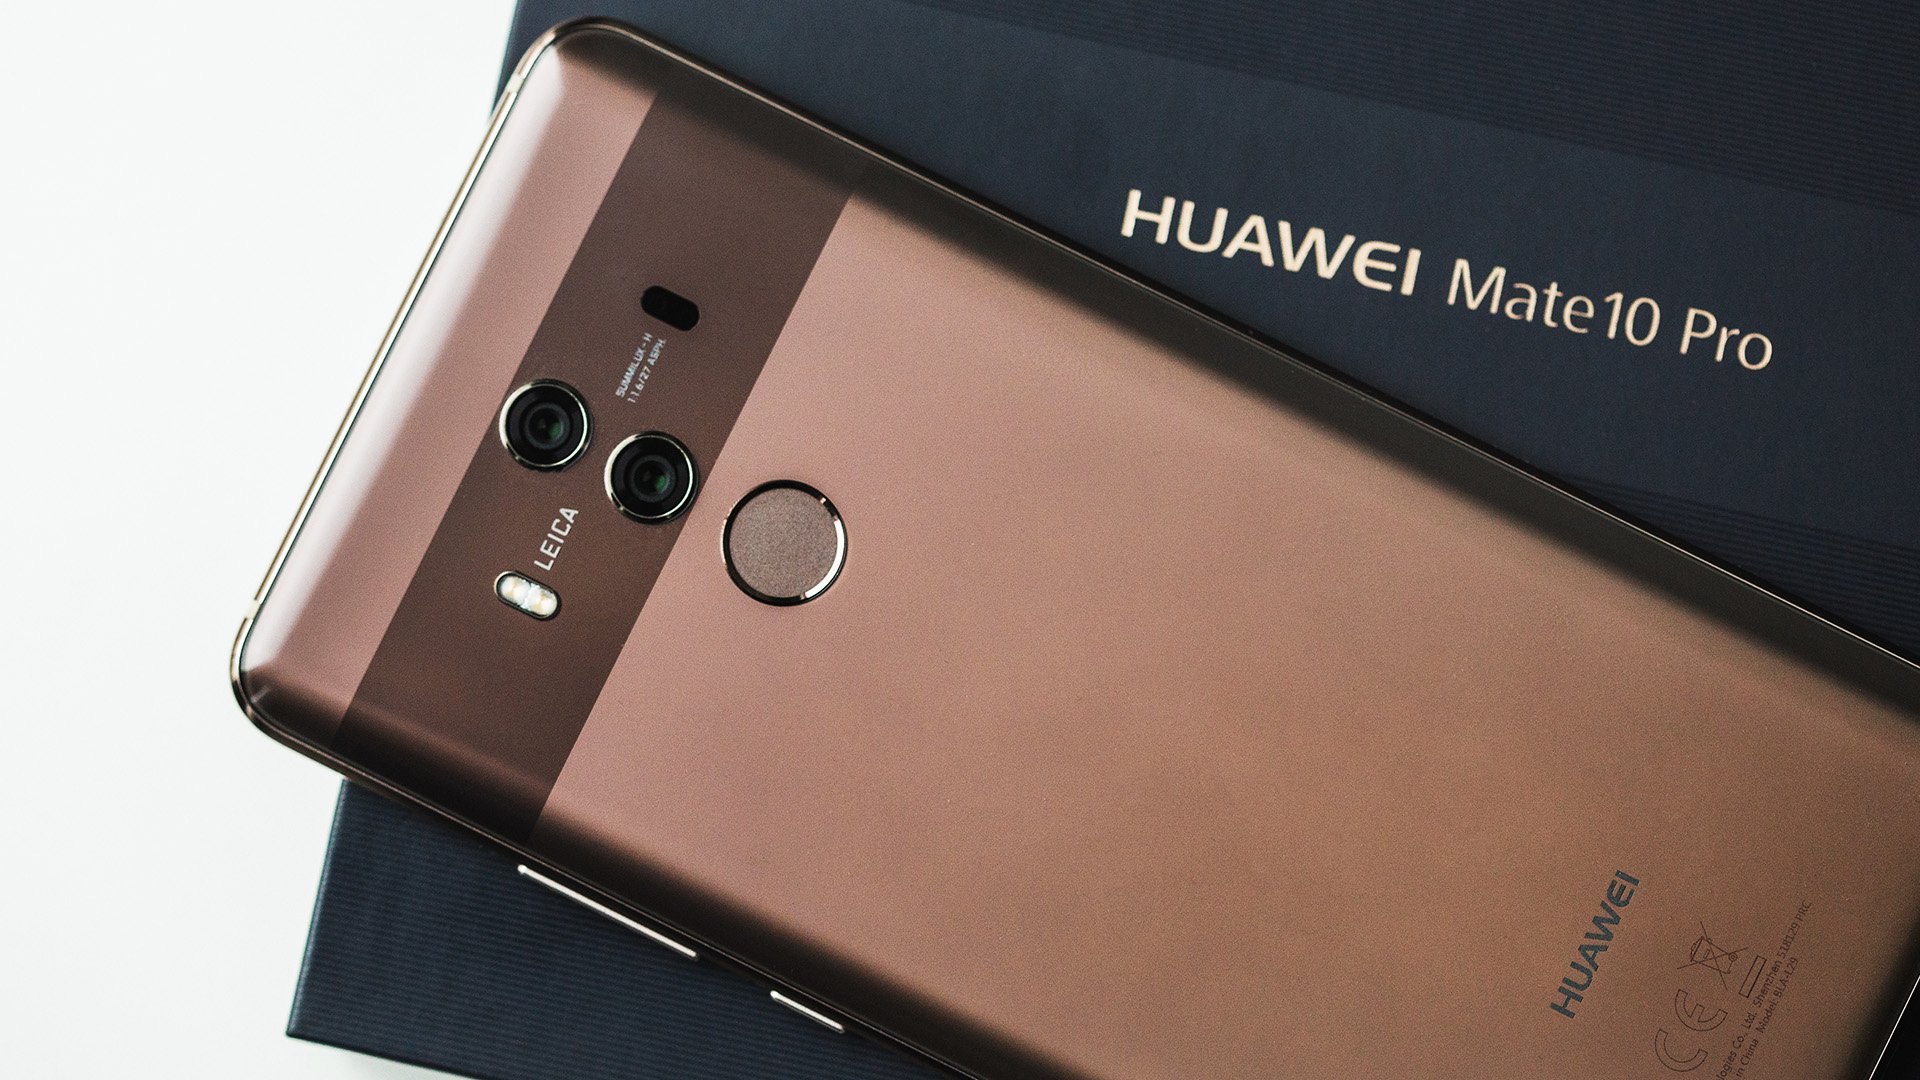 10 mate vs huawei pro review e 10 mate the price